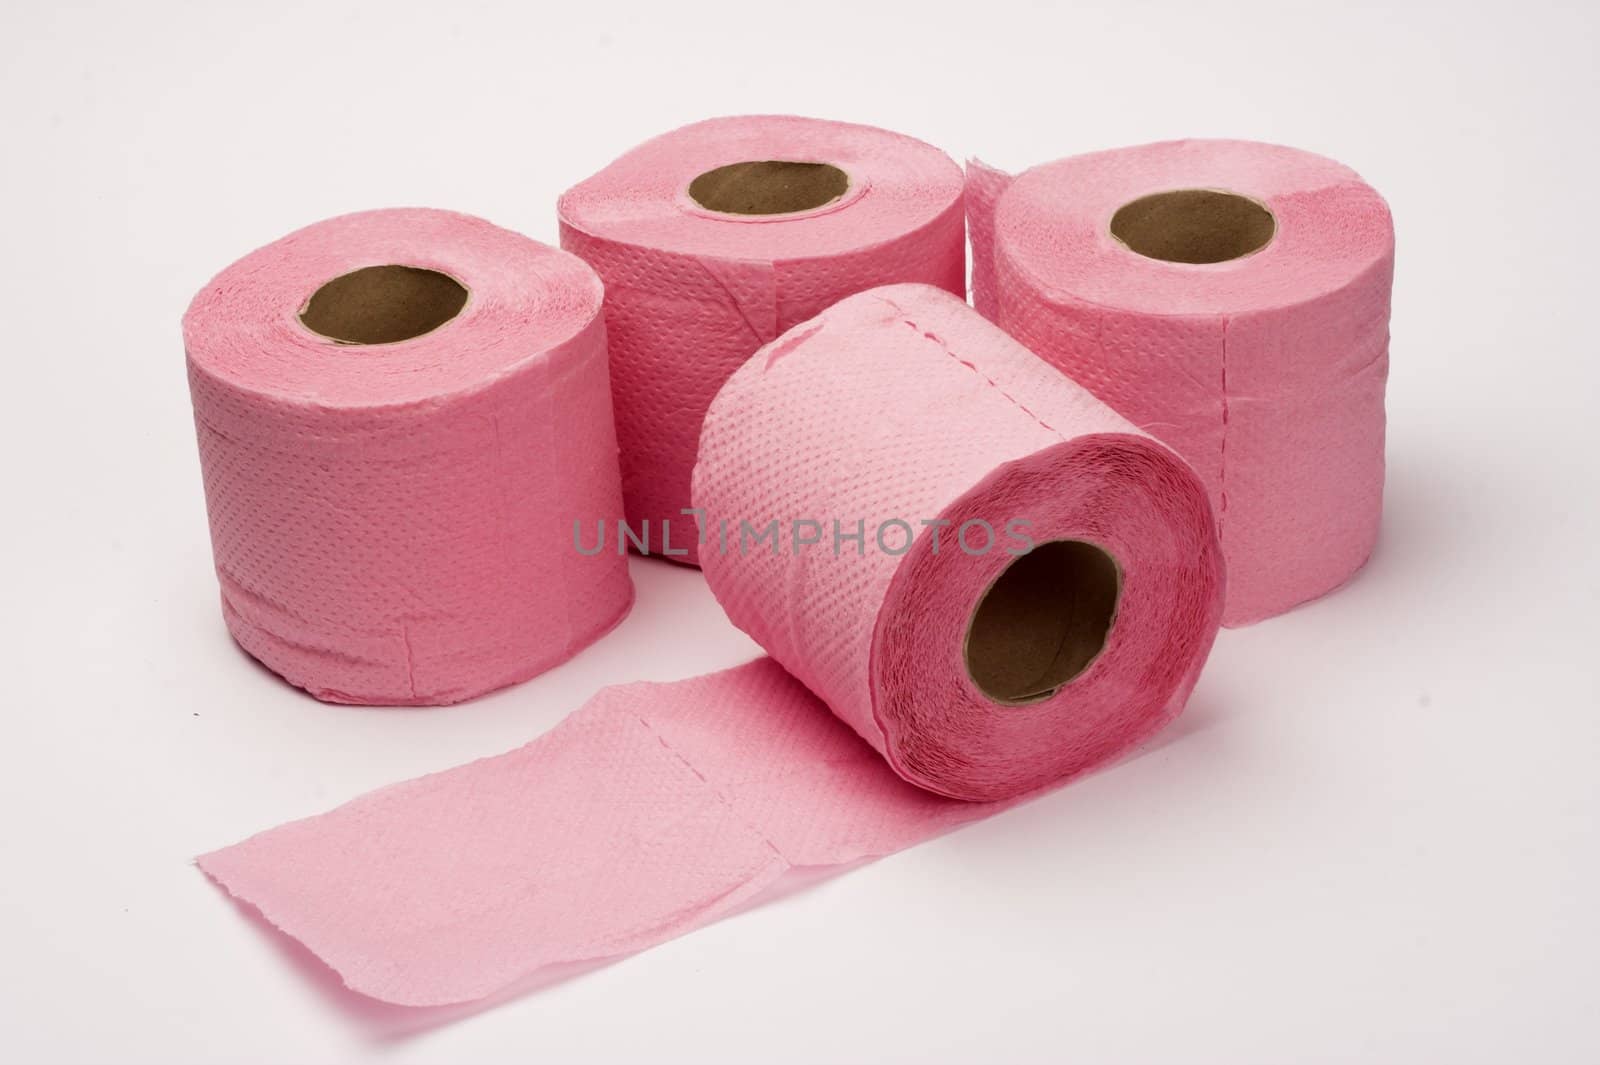 Some rolls of pink toilet paper